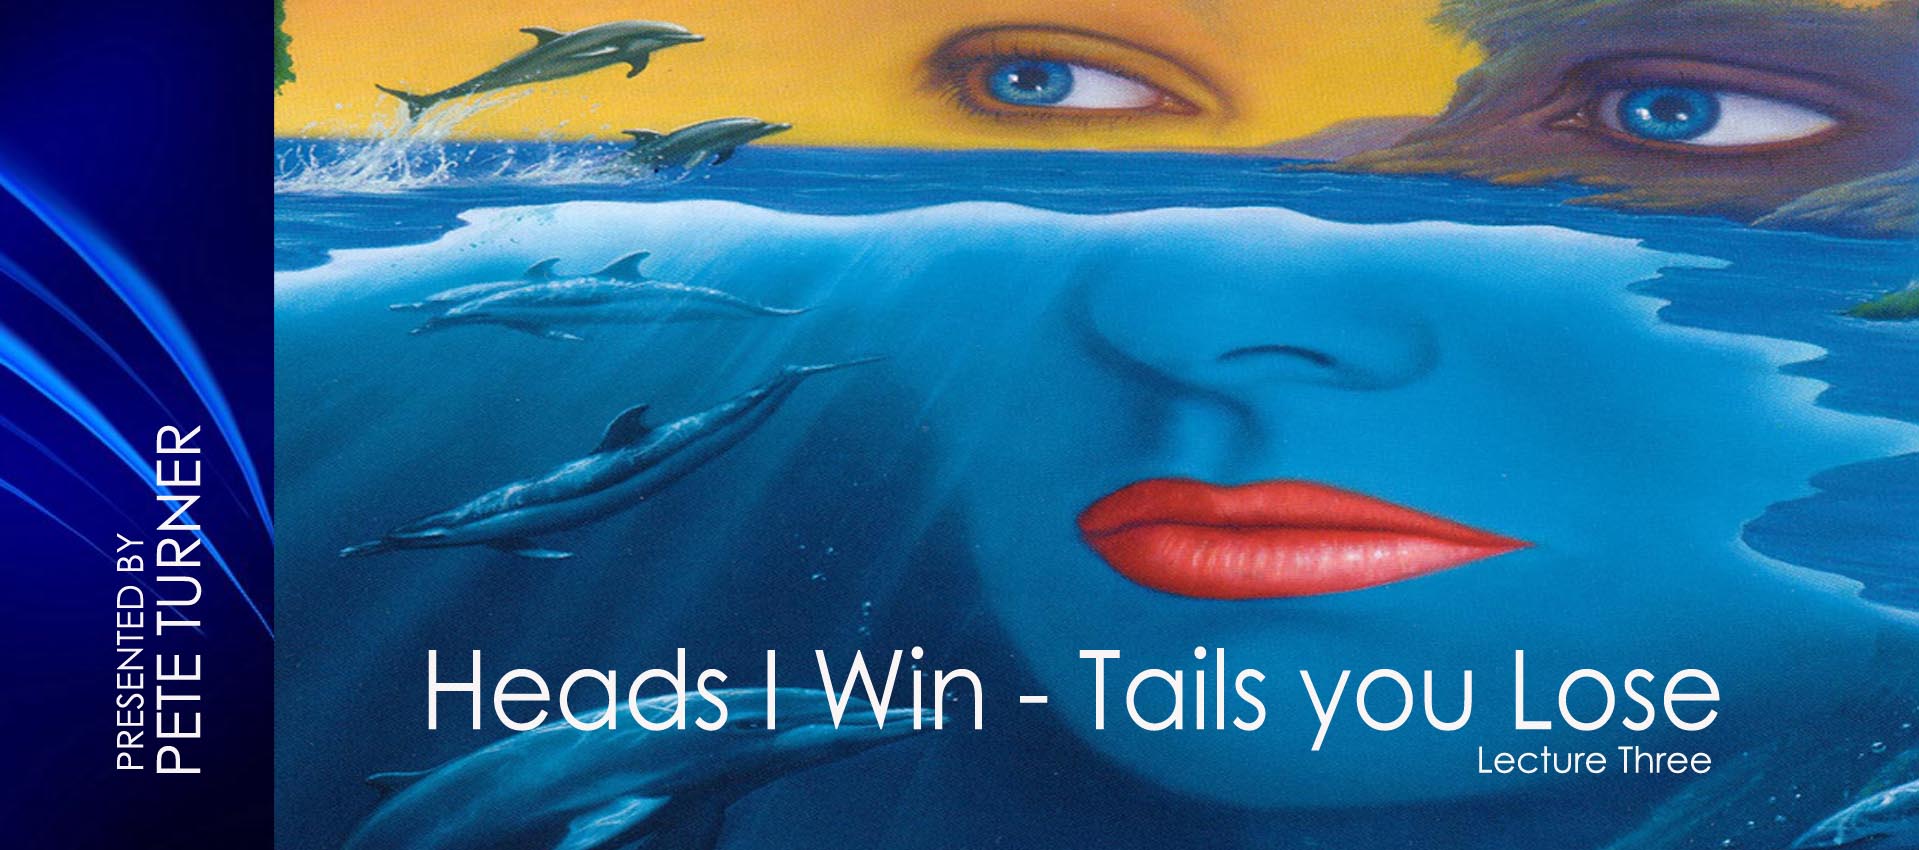 heads I win - tails you lose